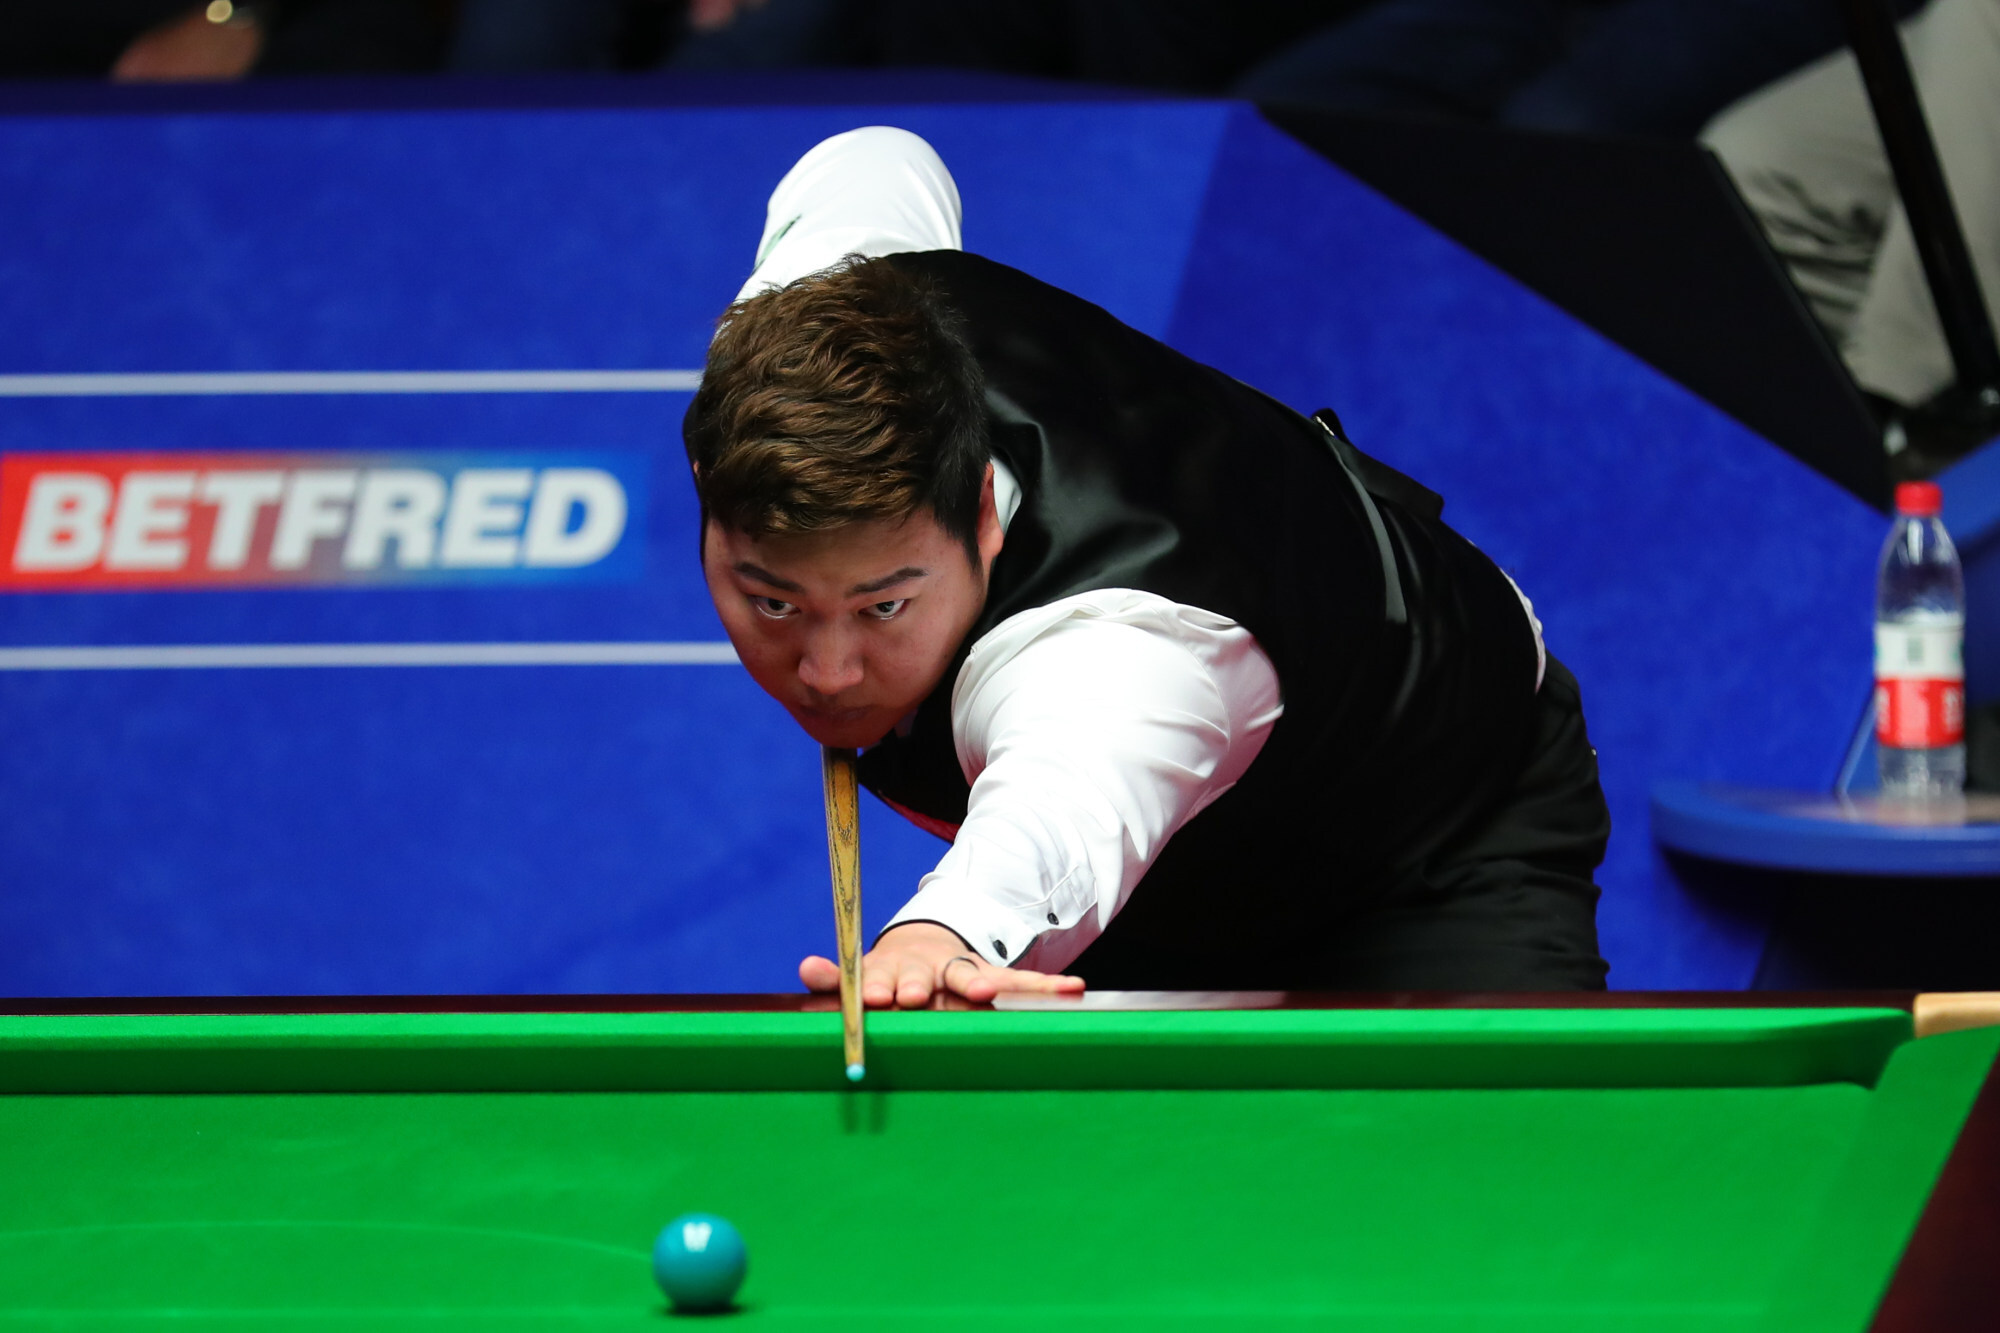 World Championship 2022 Yan Bingtao playing catch-up against Mark Williams as Class of 92 set pace South China Morning Post